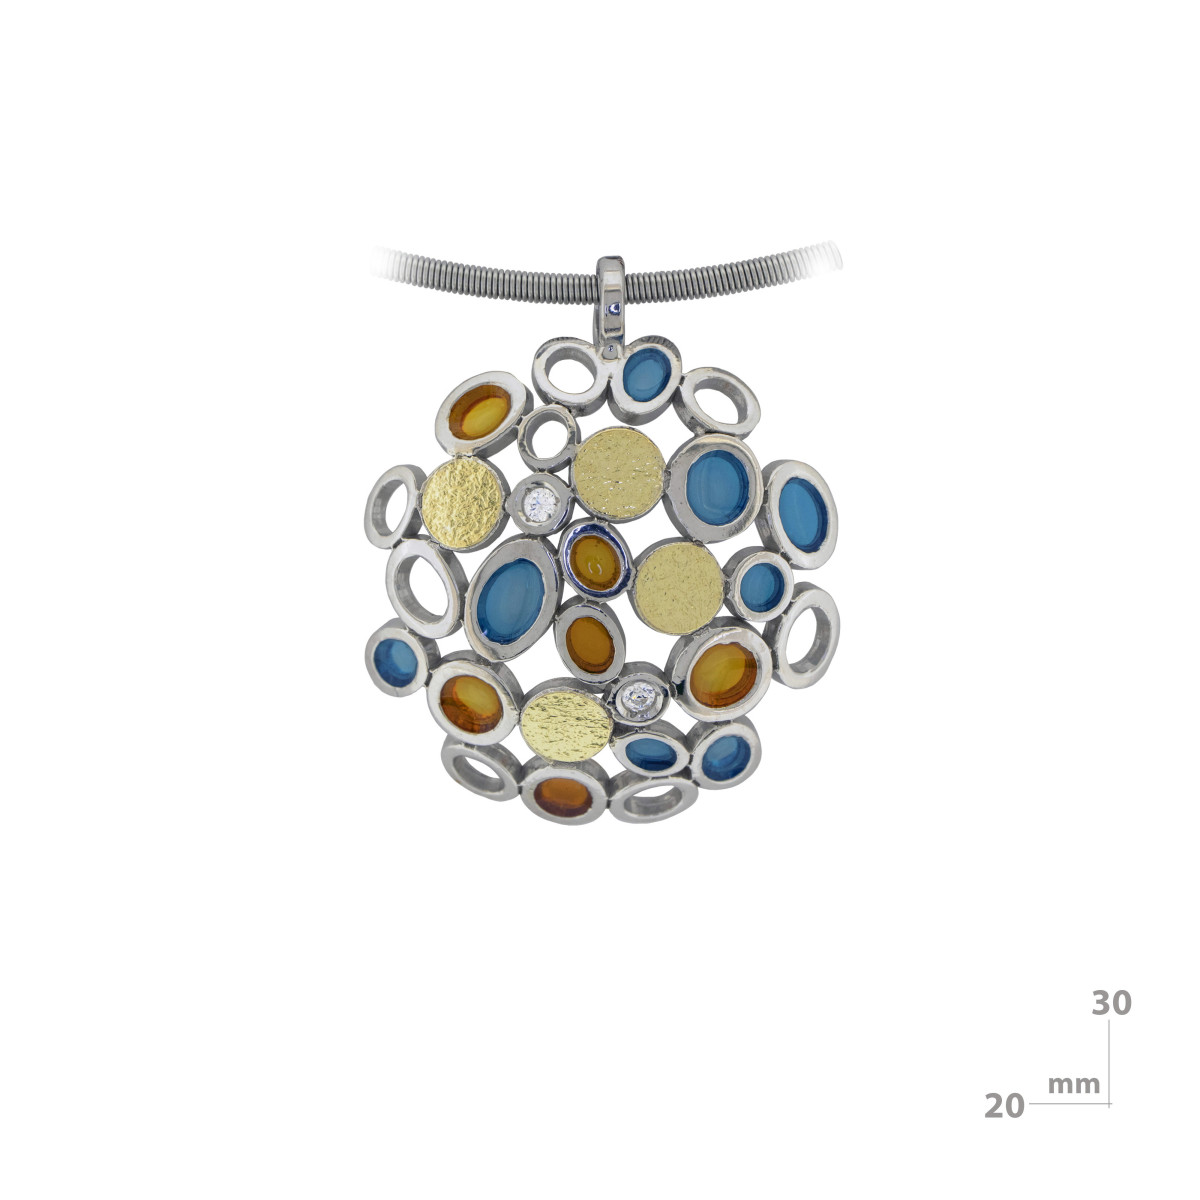 Pendant made of silver, gold enamel and brilliant